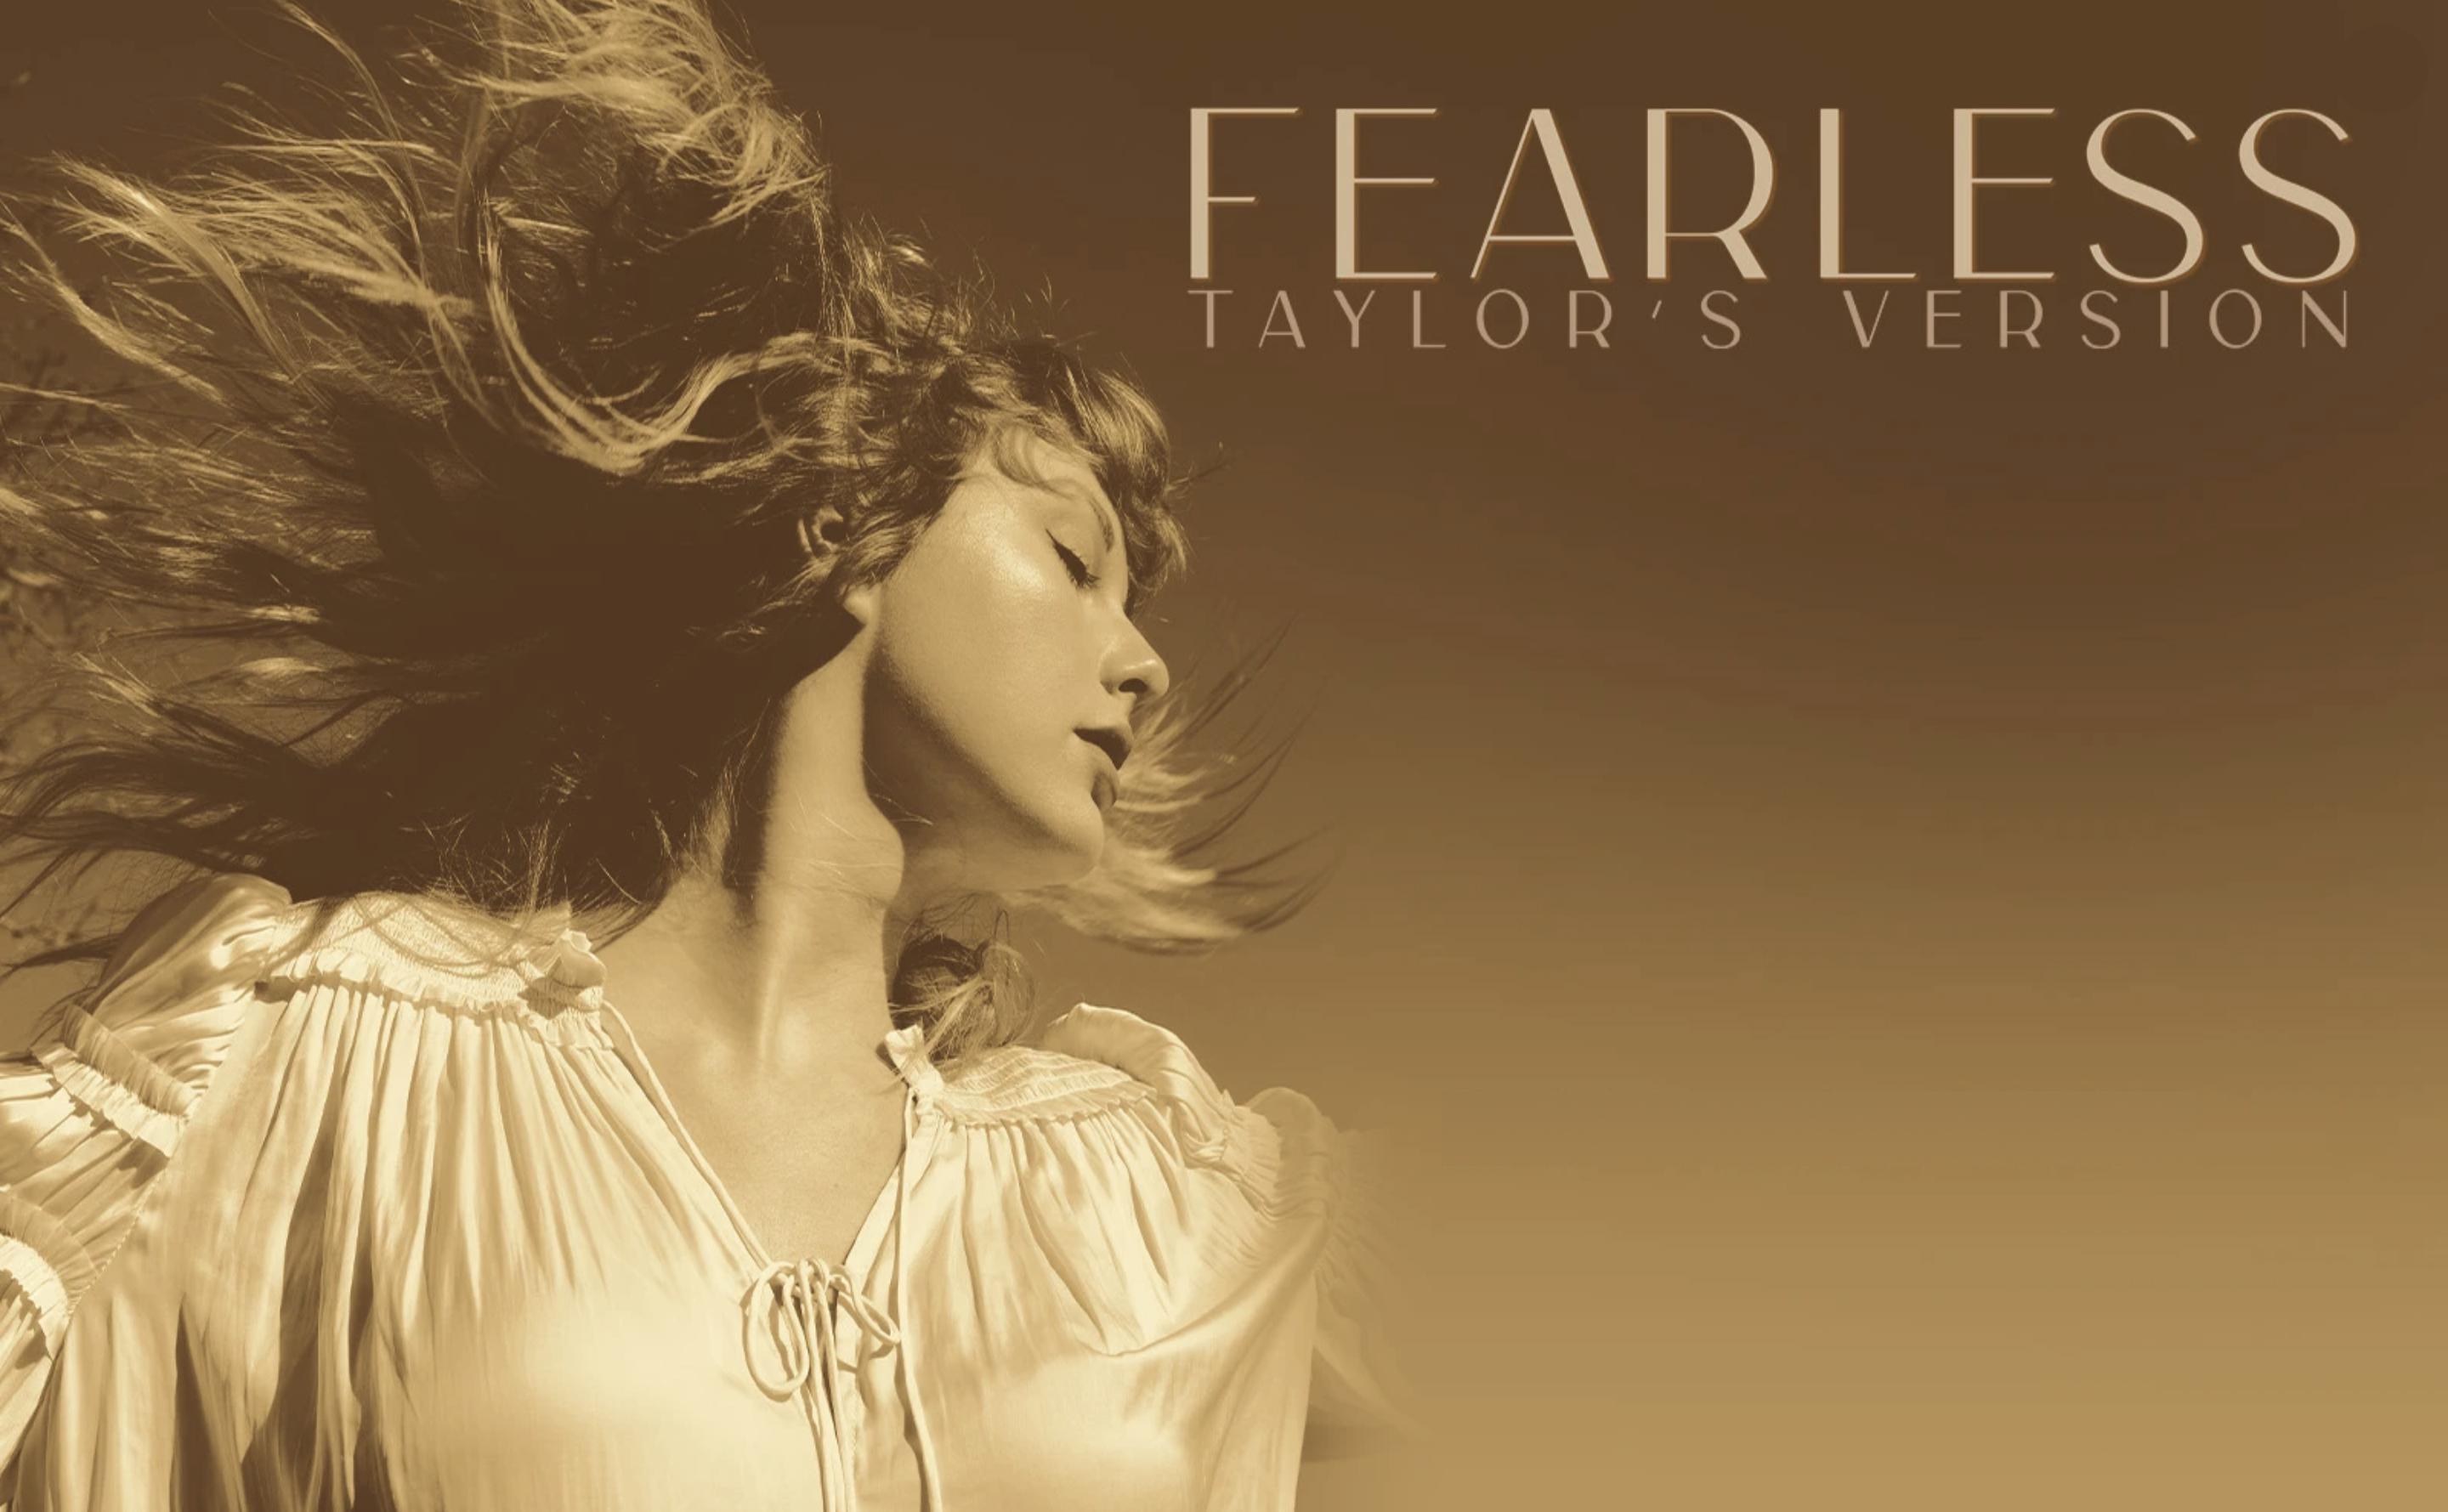 a quick and dirty Fearless (Taylor's Version) desktop wallpaper!: TaylorSwift